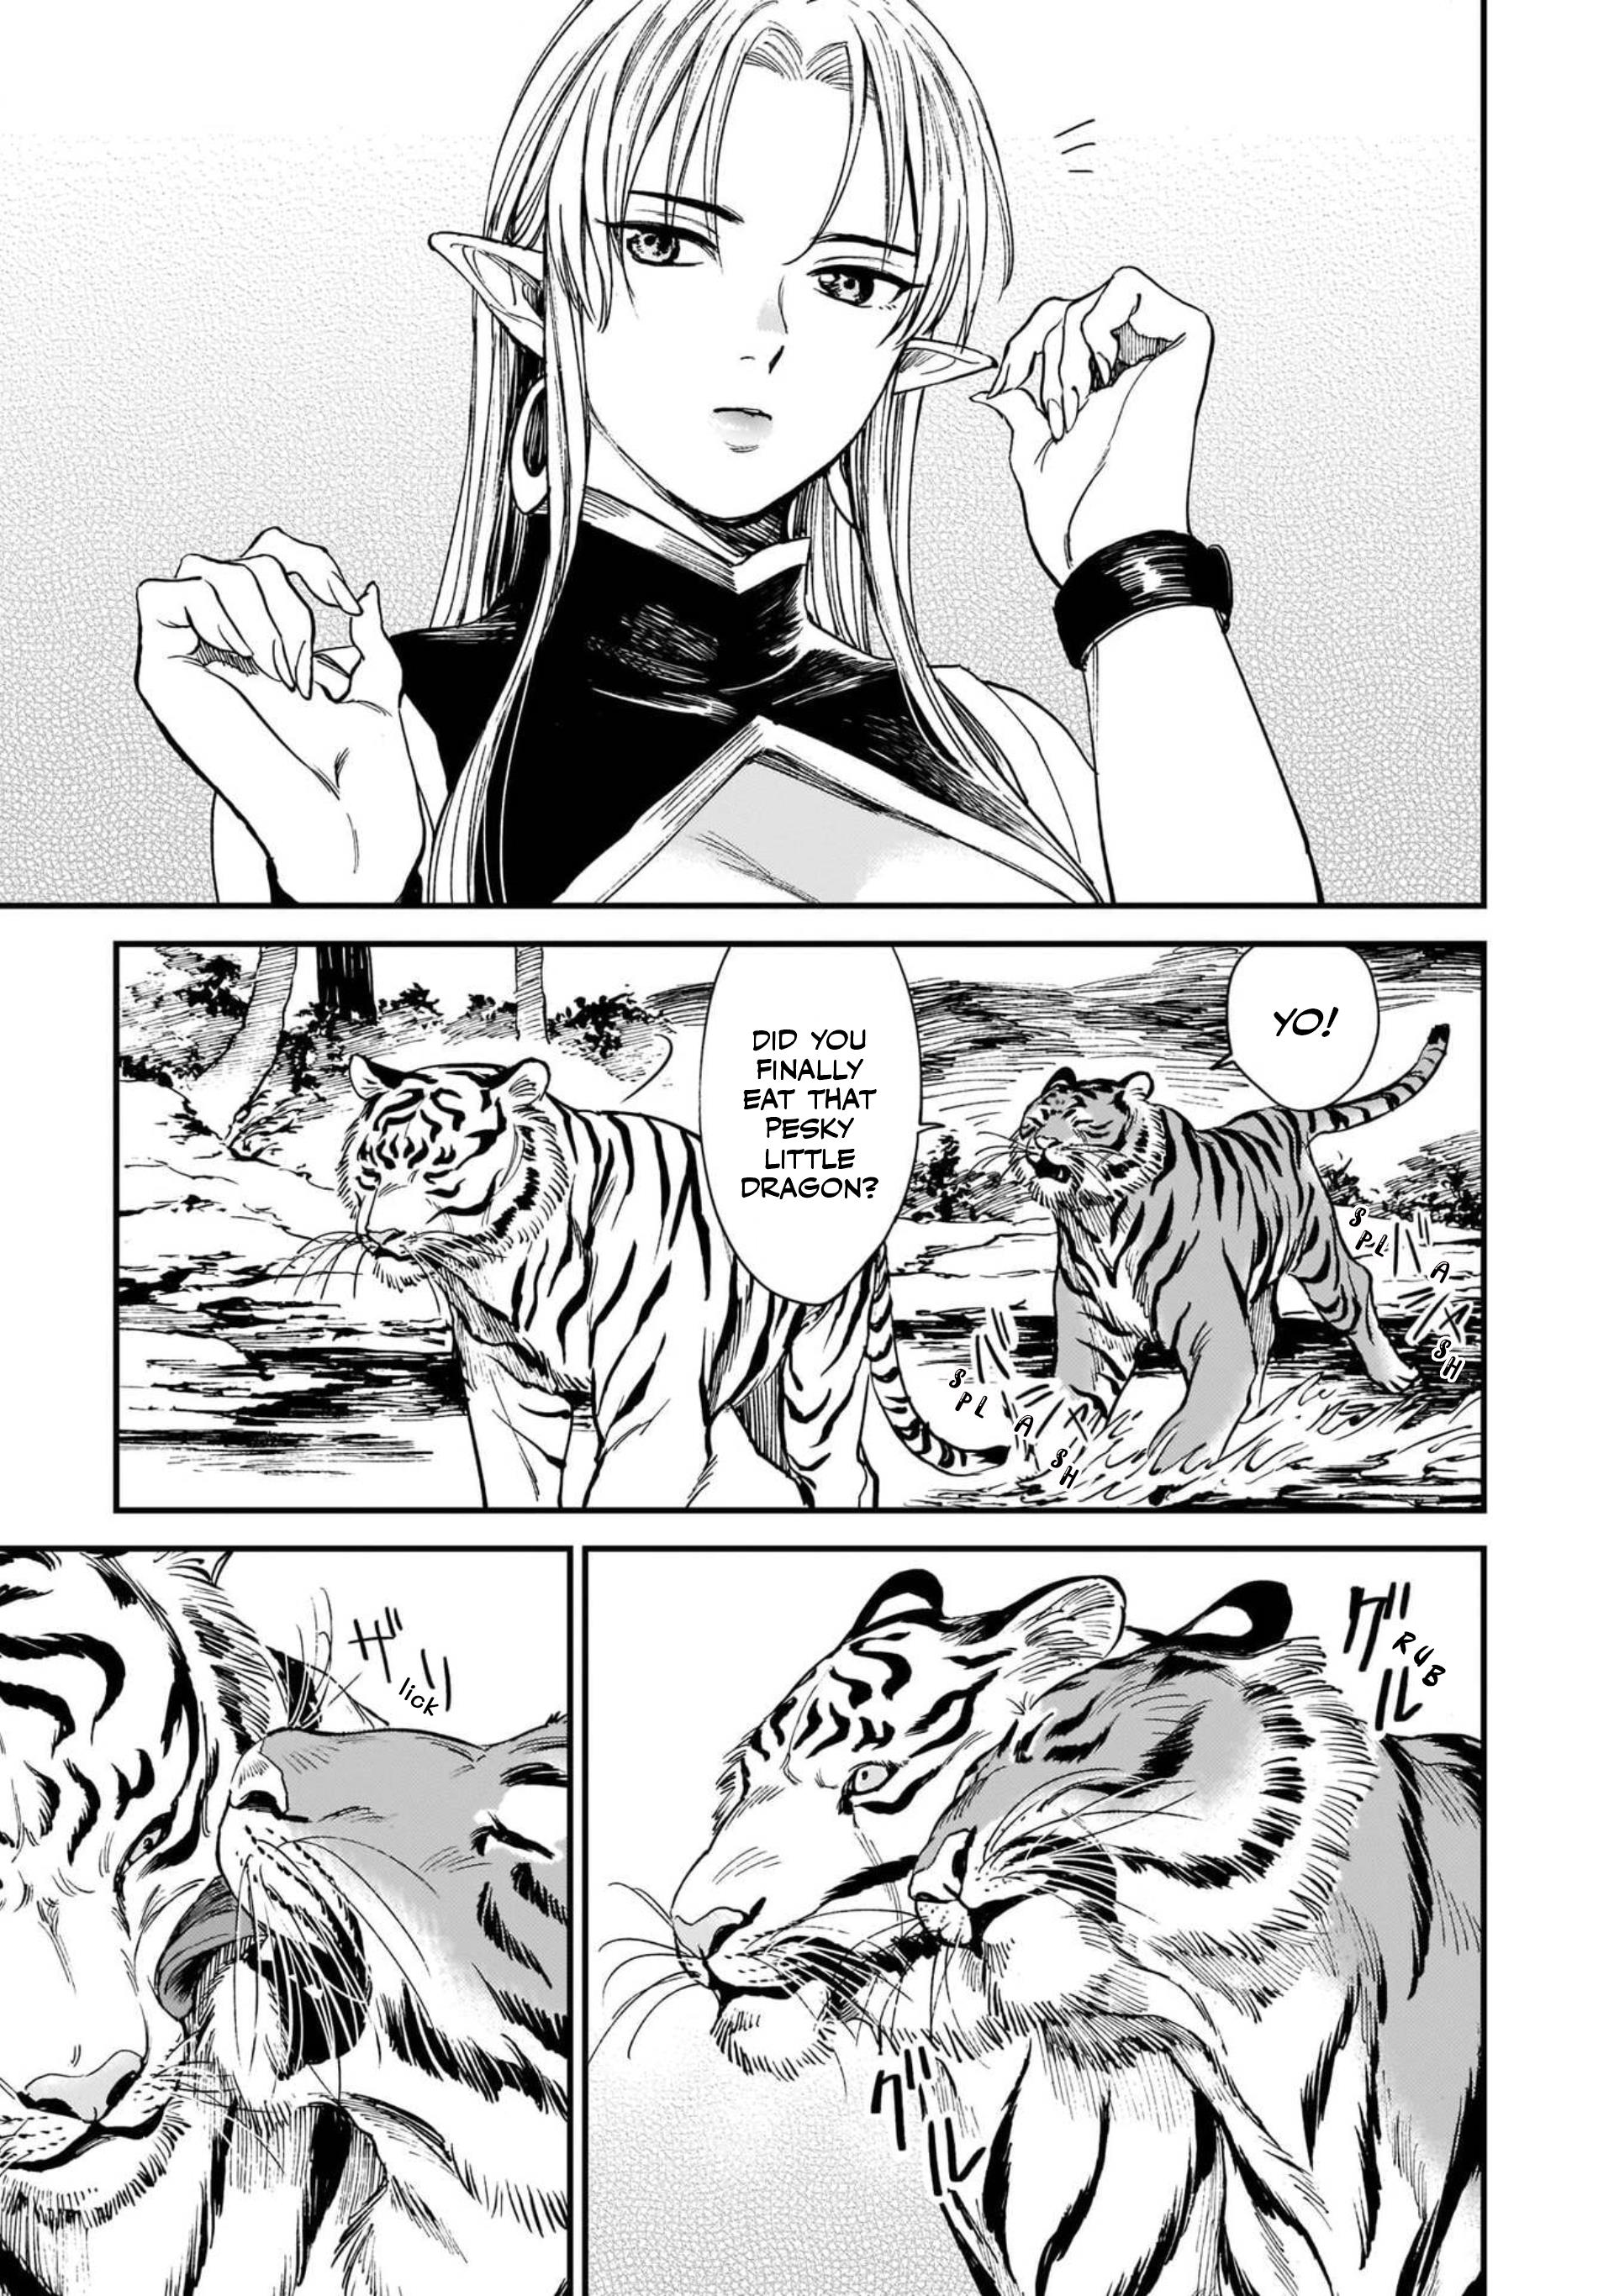 The Tiger Still Won't Eat The Dragon - Page 2